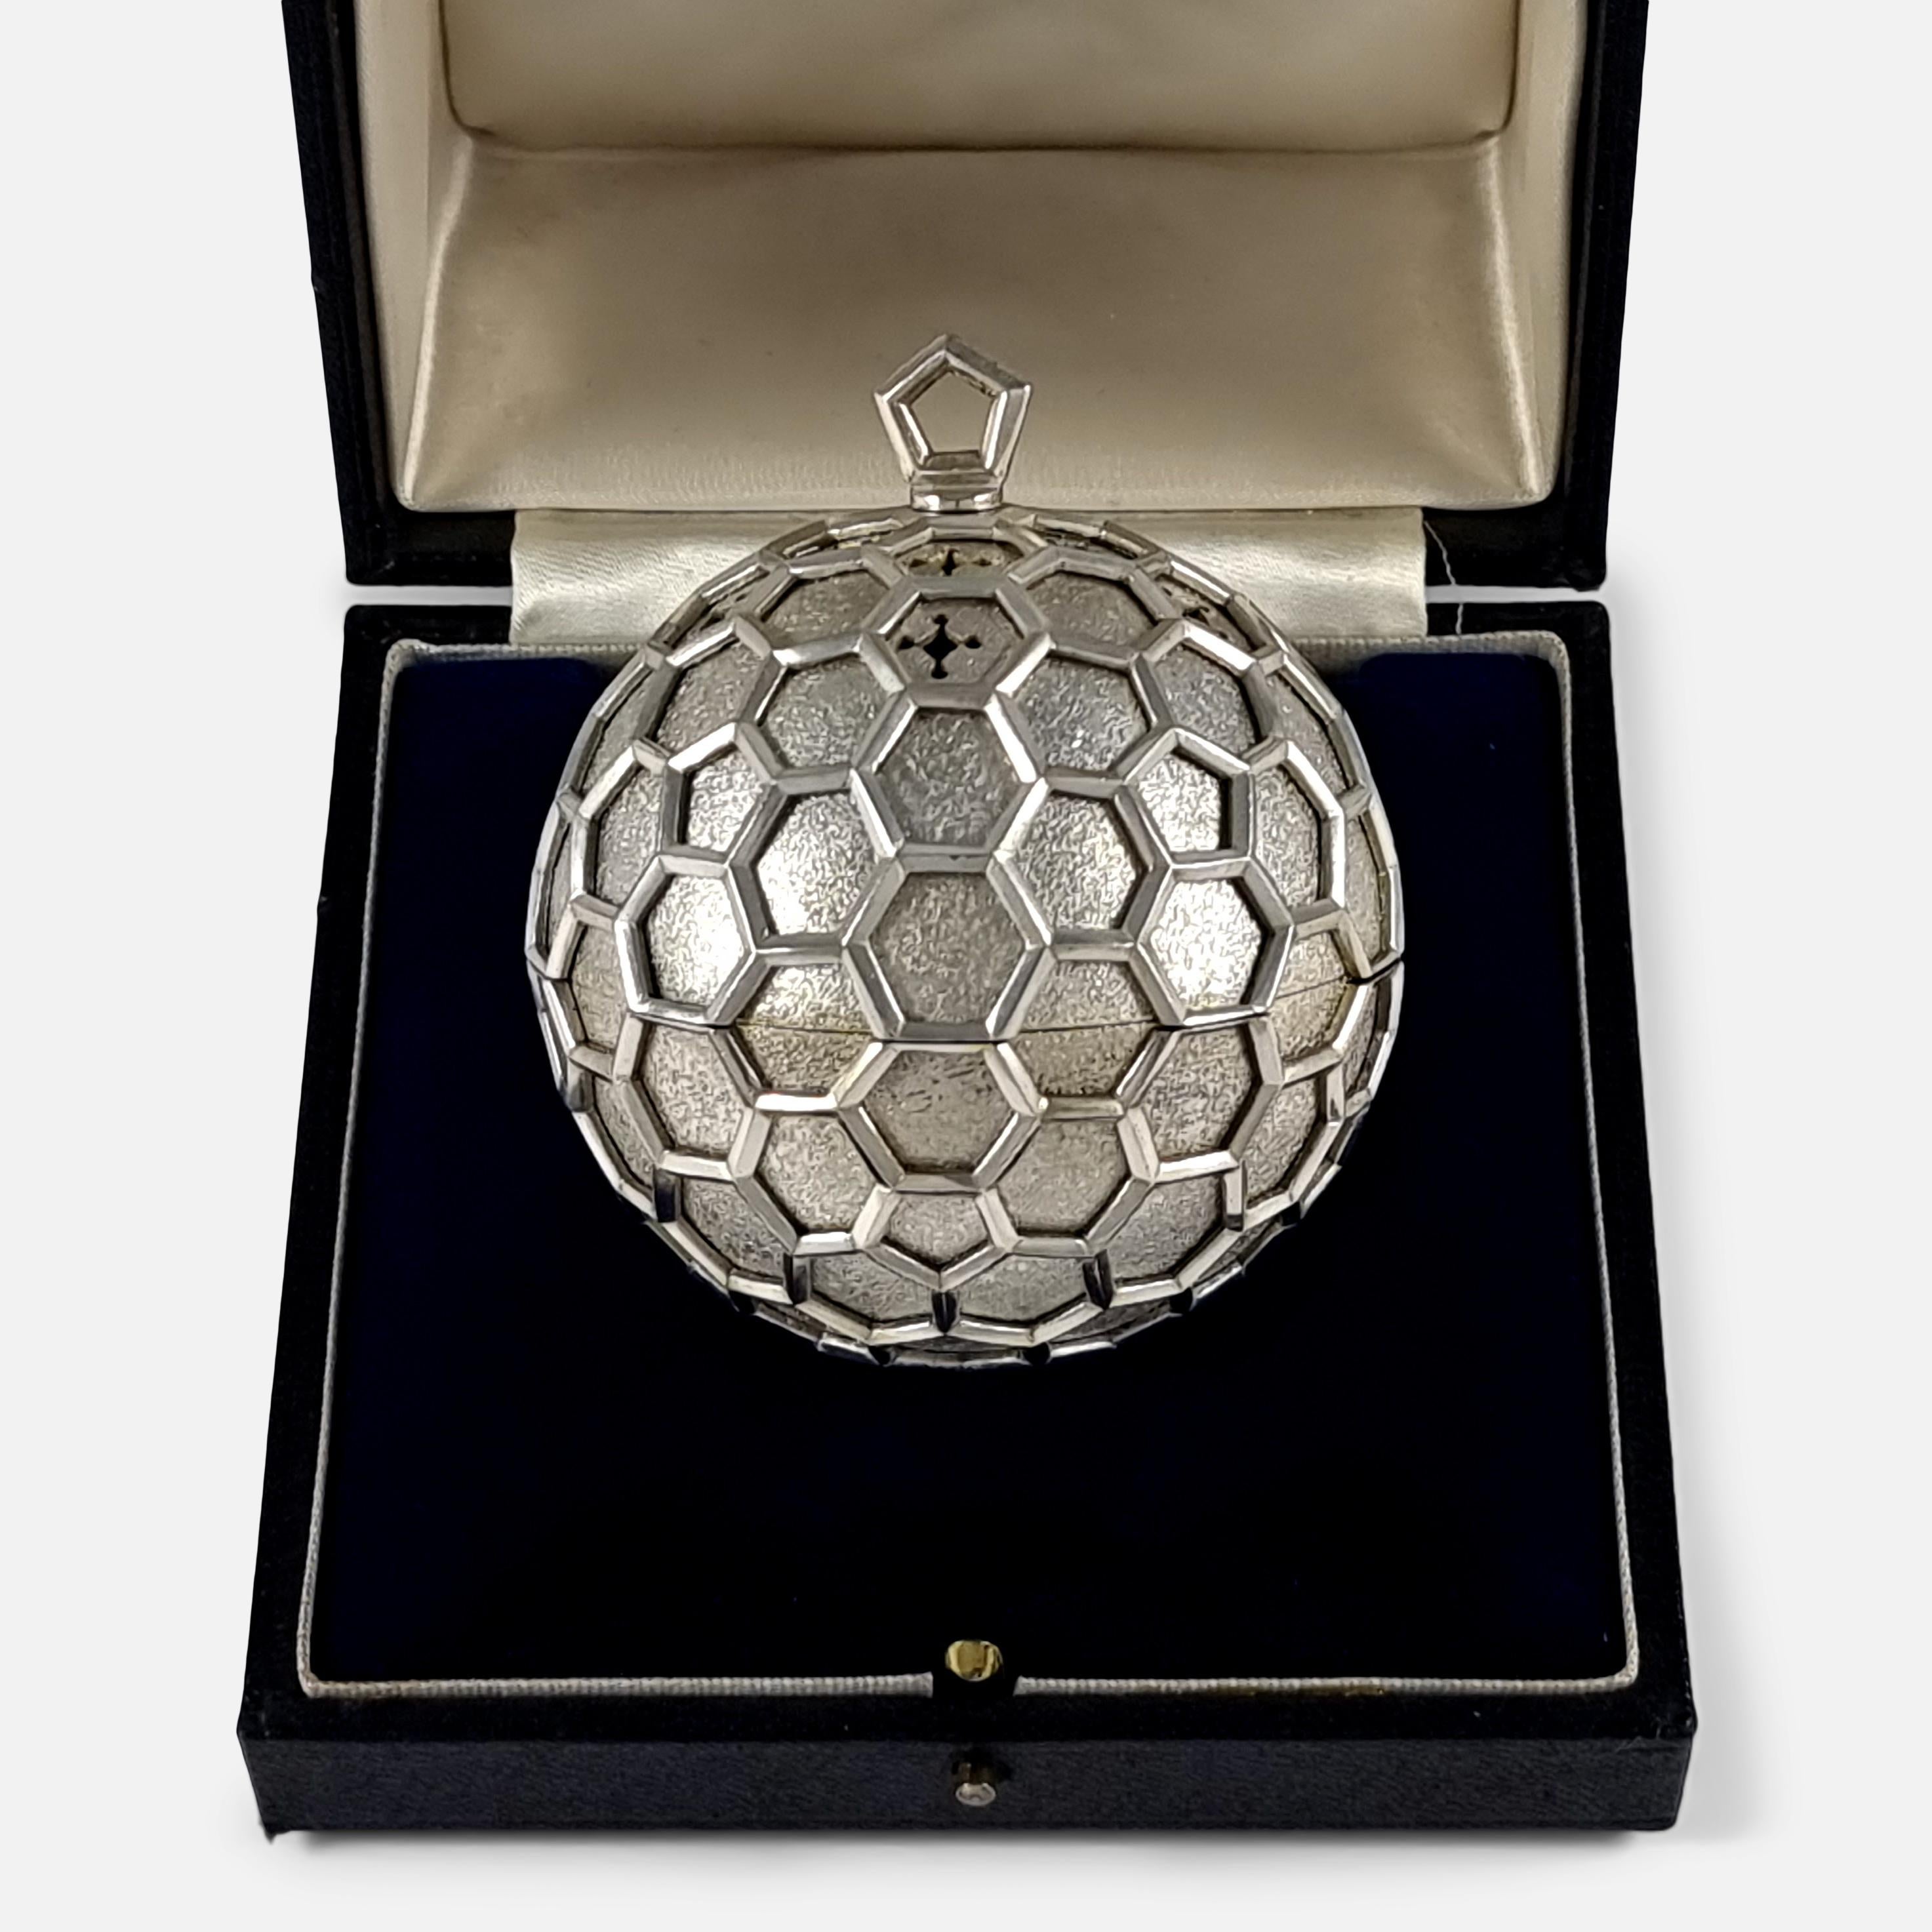 A cased Elizabeth II sterling silver Pomander designed by Anthony Elson RCA, for Garrard & Co Ltd. The Pomander is of globular form, the textured ground with decorative piercing, pierced honeycomb overlay, and a gilded interior.

The term